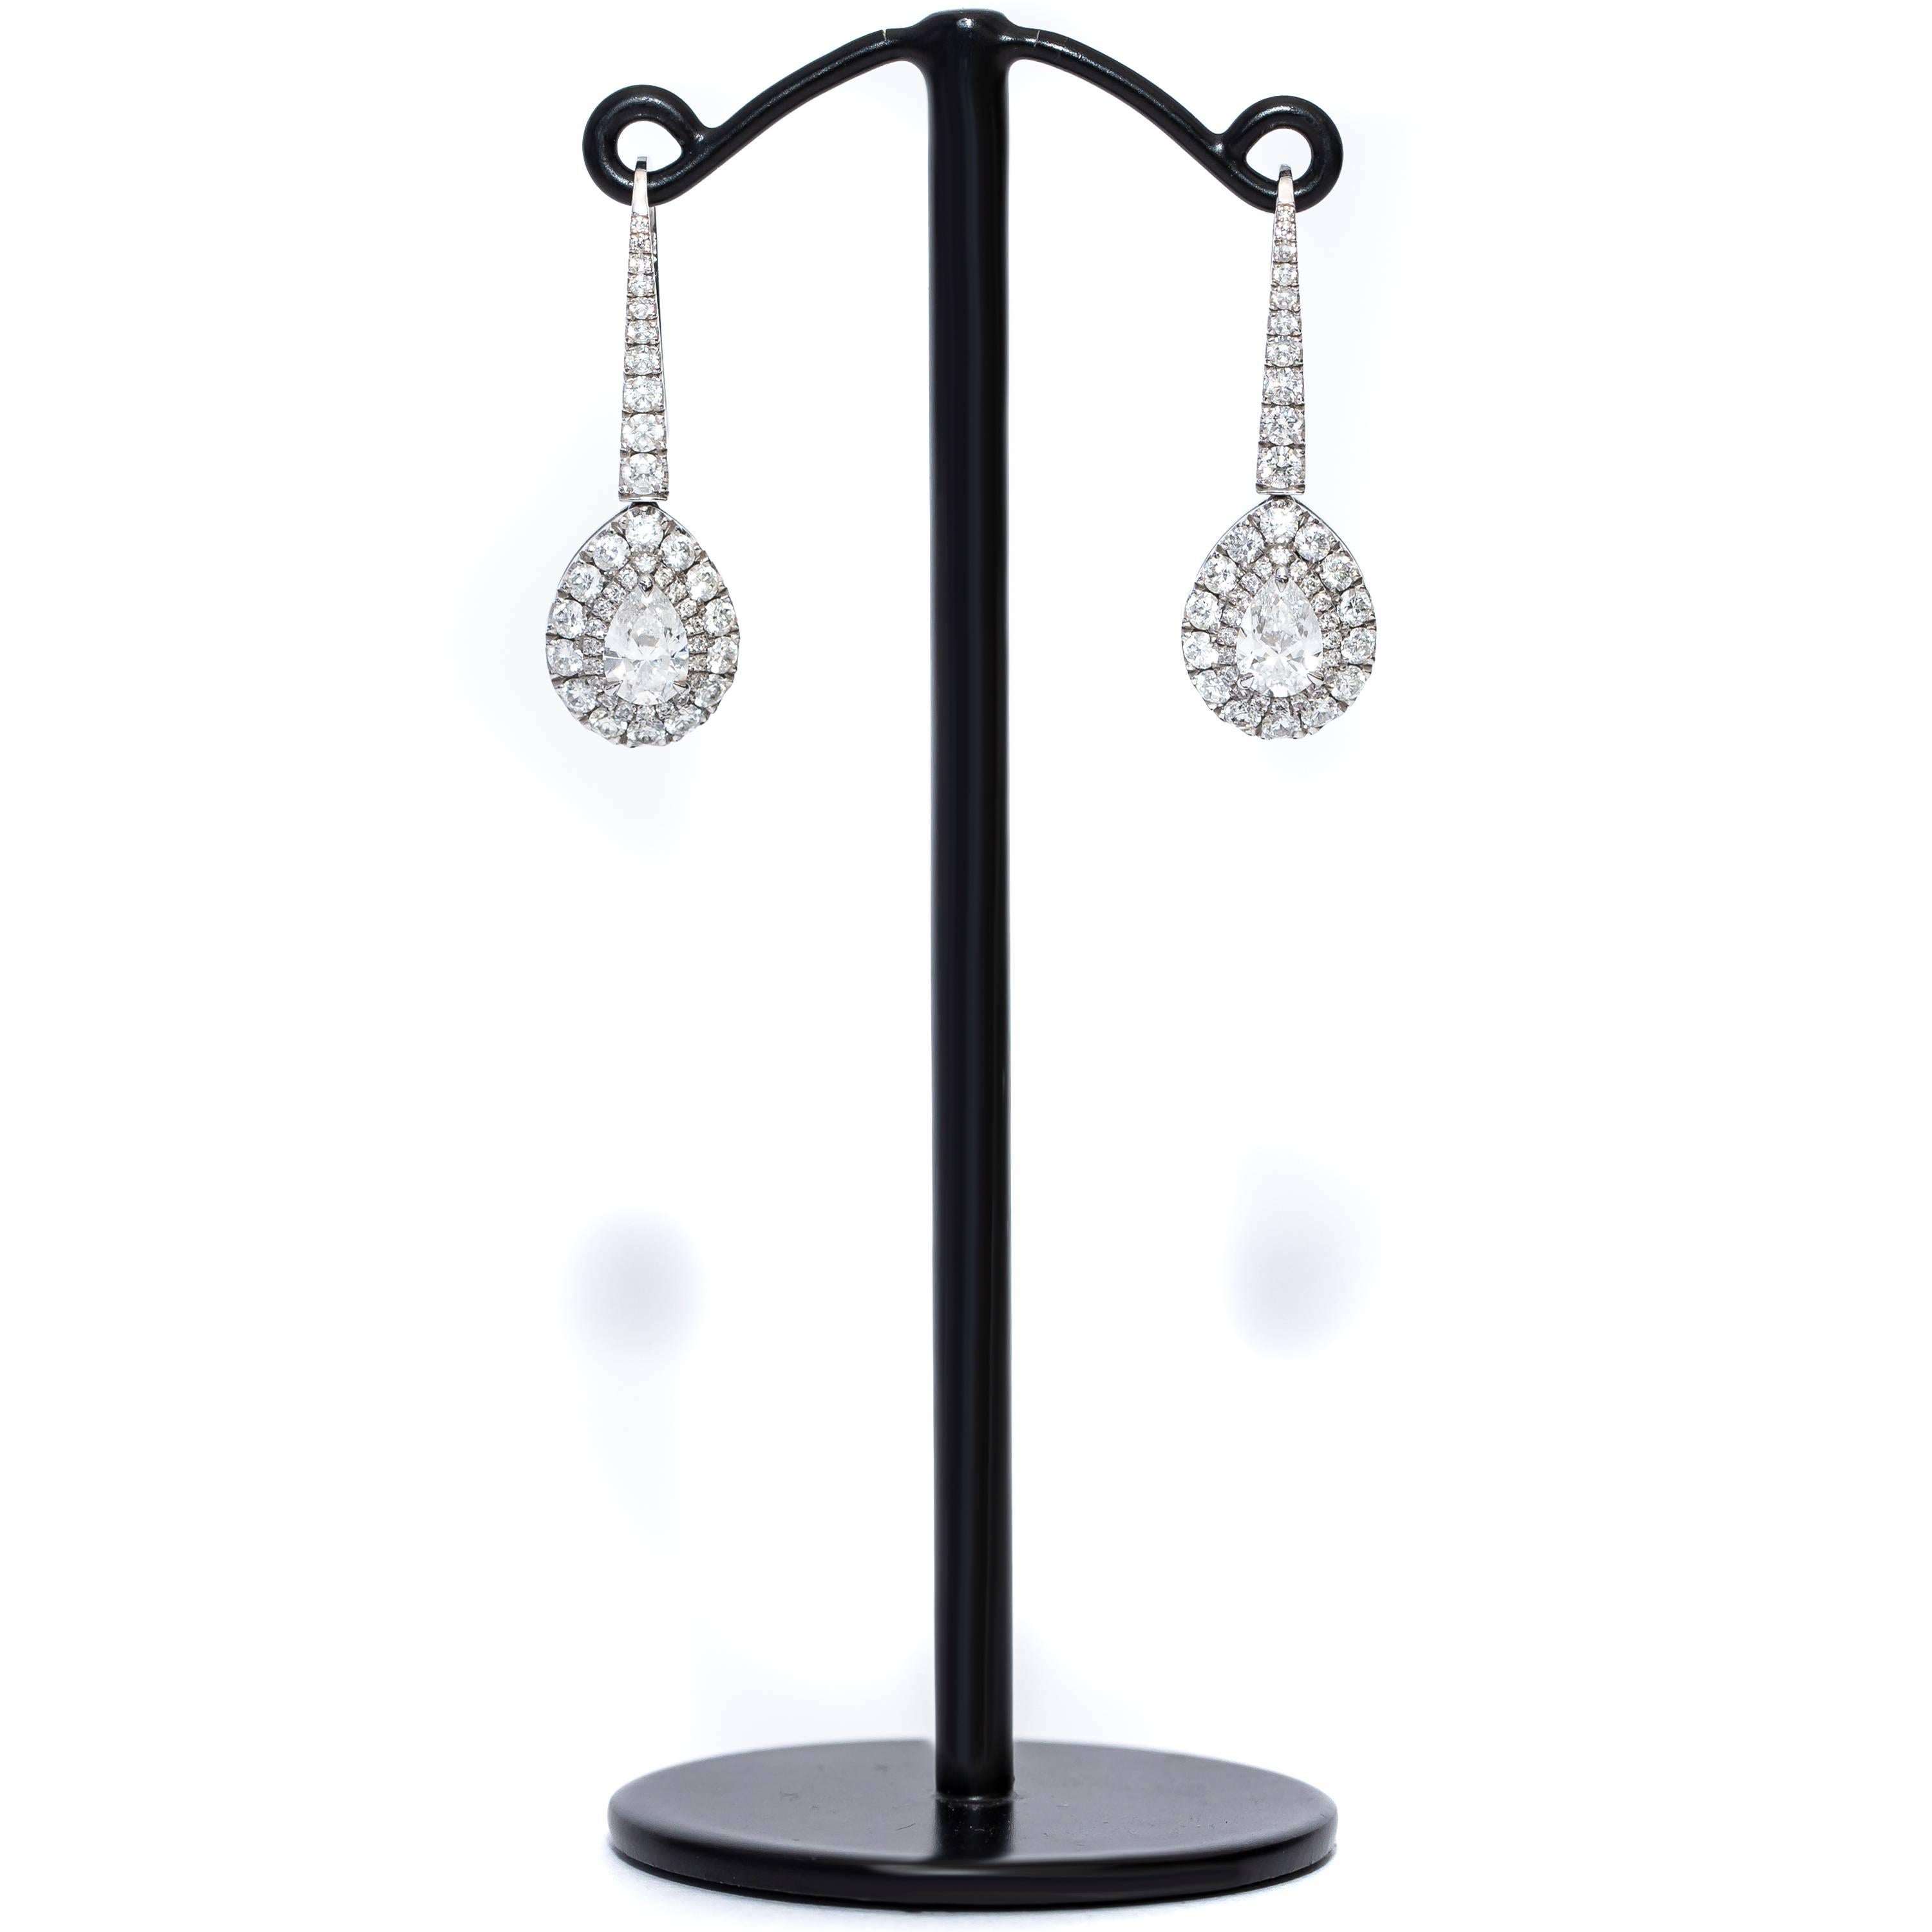 These Beautiful GIA Certified Diamond Pear Shaped Drop Halo Earrings feature 2 GIA Pear Brilliant Diamonds D-VS1 in the center both weighing 0.50 Carat each surrounded by 1.30 Carat Color H Clarity SI1 Round Brilliant Diamonds on the Halo and